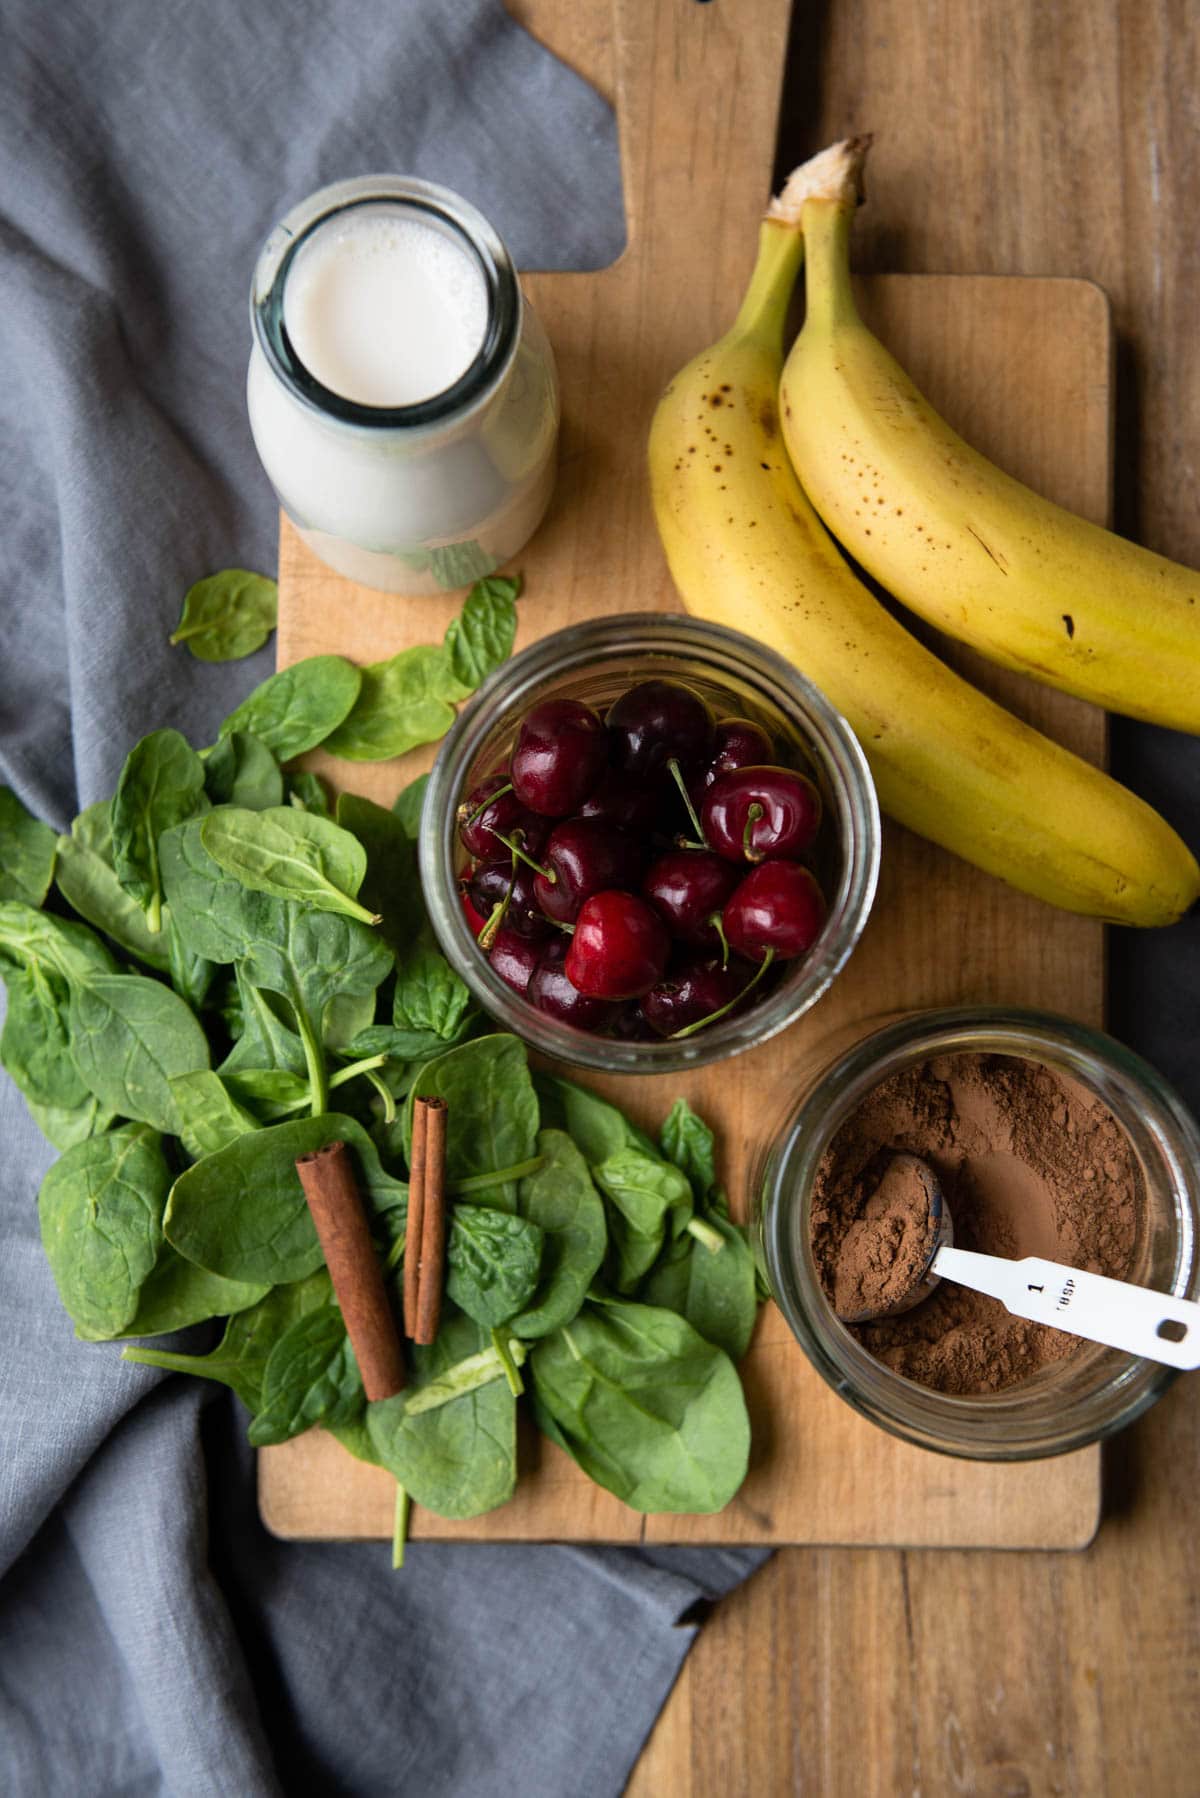 ingredients for a dessert smoothie including almond milk, bananas, cherries, spinach, cacao and cinnamon.